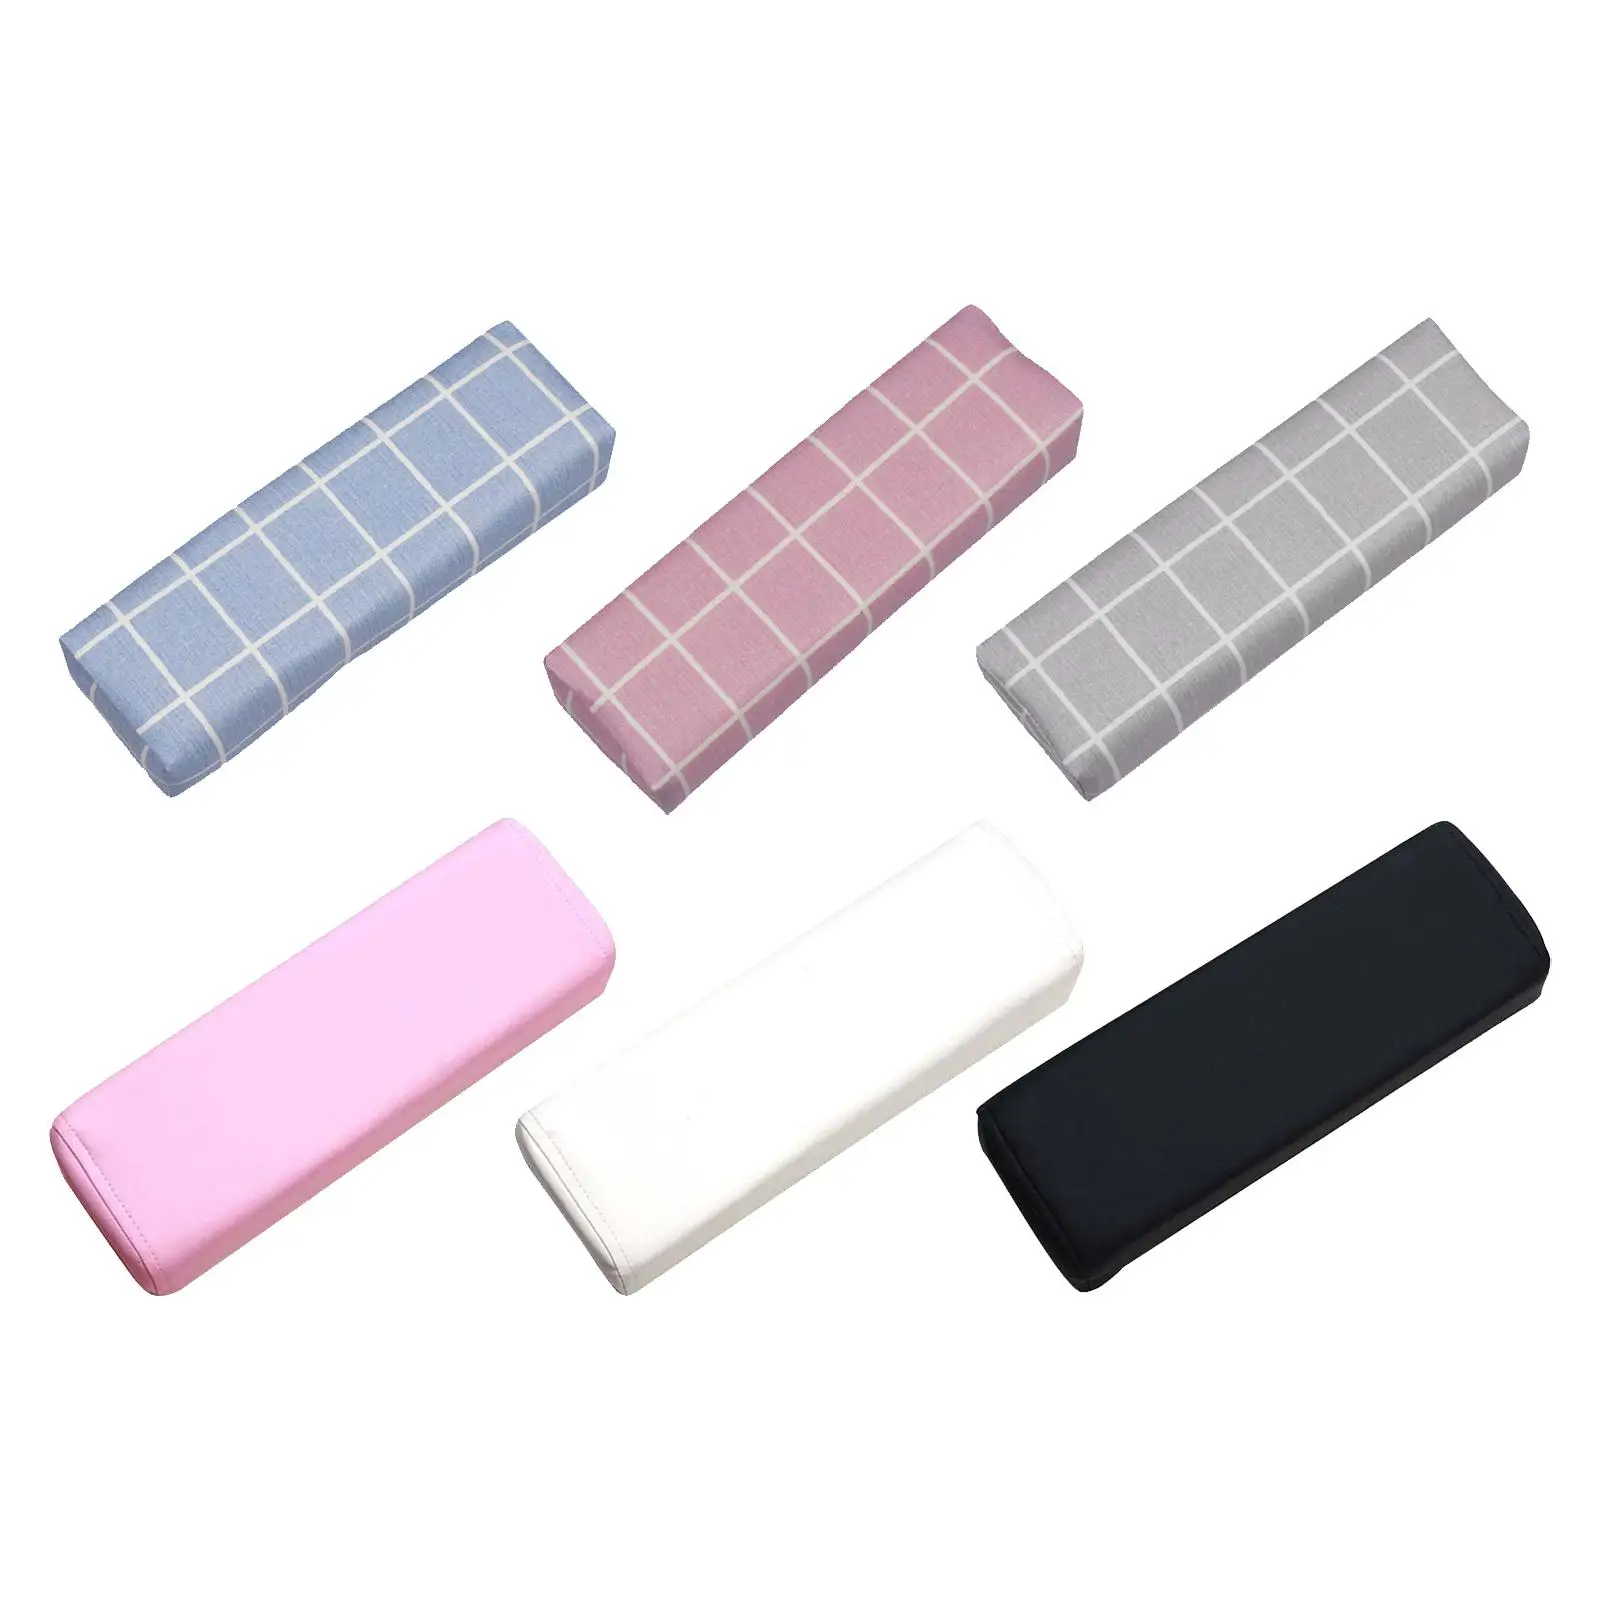 Manicure Hand Pillow Soft Sweatproof Washable Makeup Cosmetic Tools Hand Cushion Armrest for Manicure Nail Table Salon Home Use